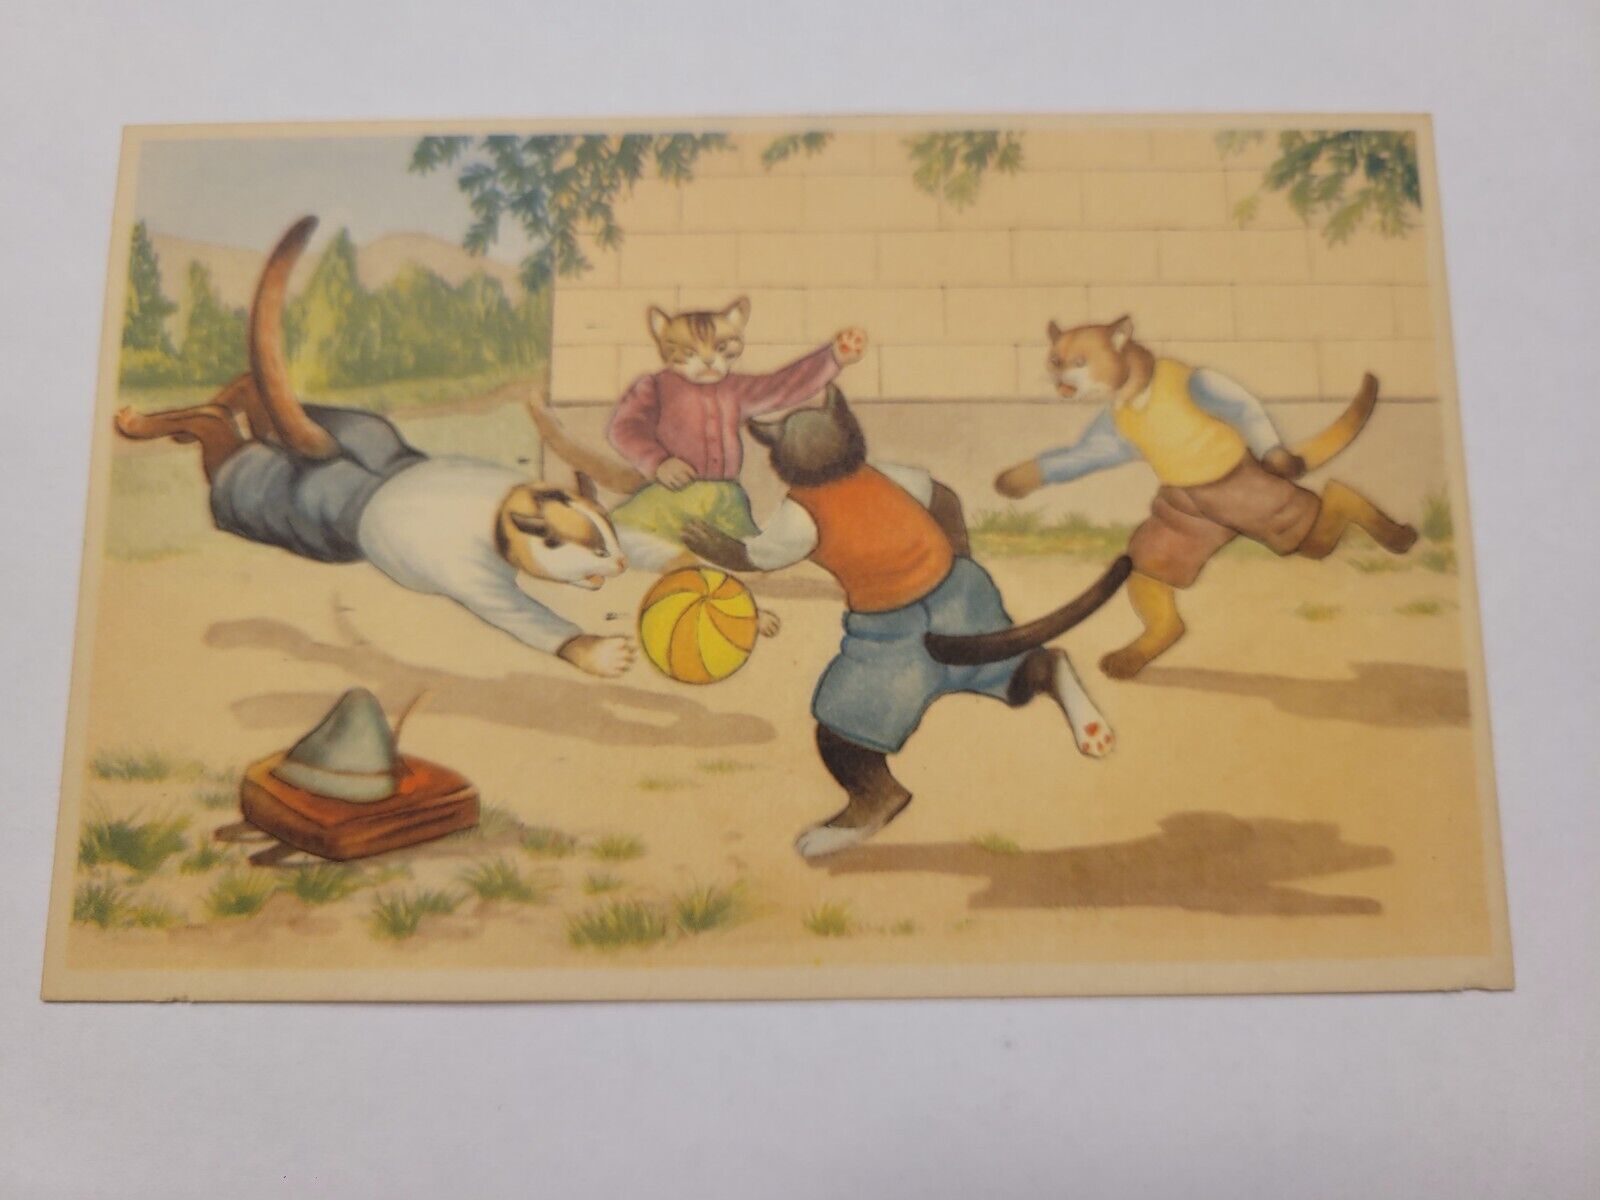 Vintage ALFRED MANZIER CATS PLAYING SOCCER POSTCARD Rare HTF Card UNUSED 